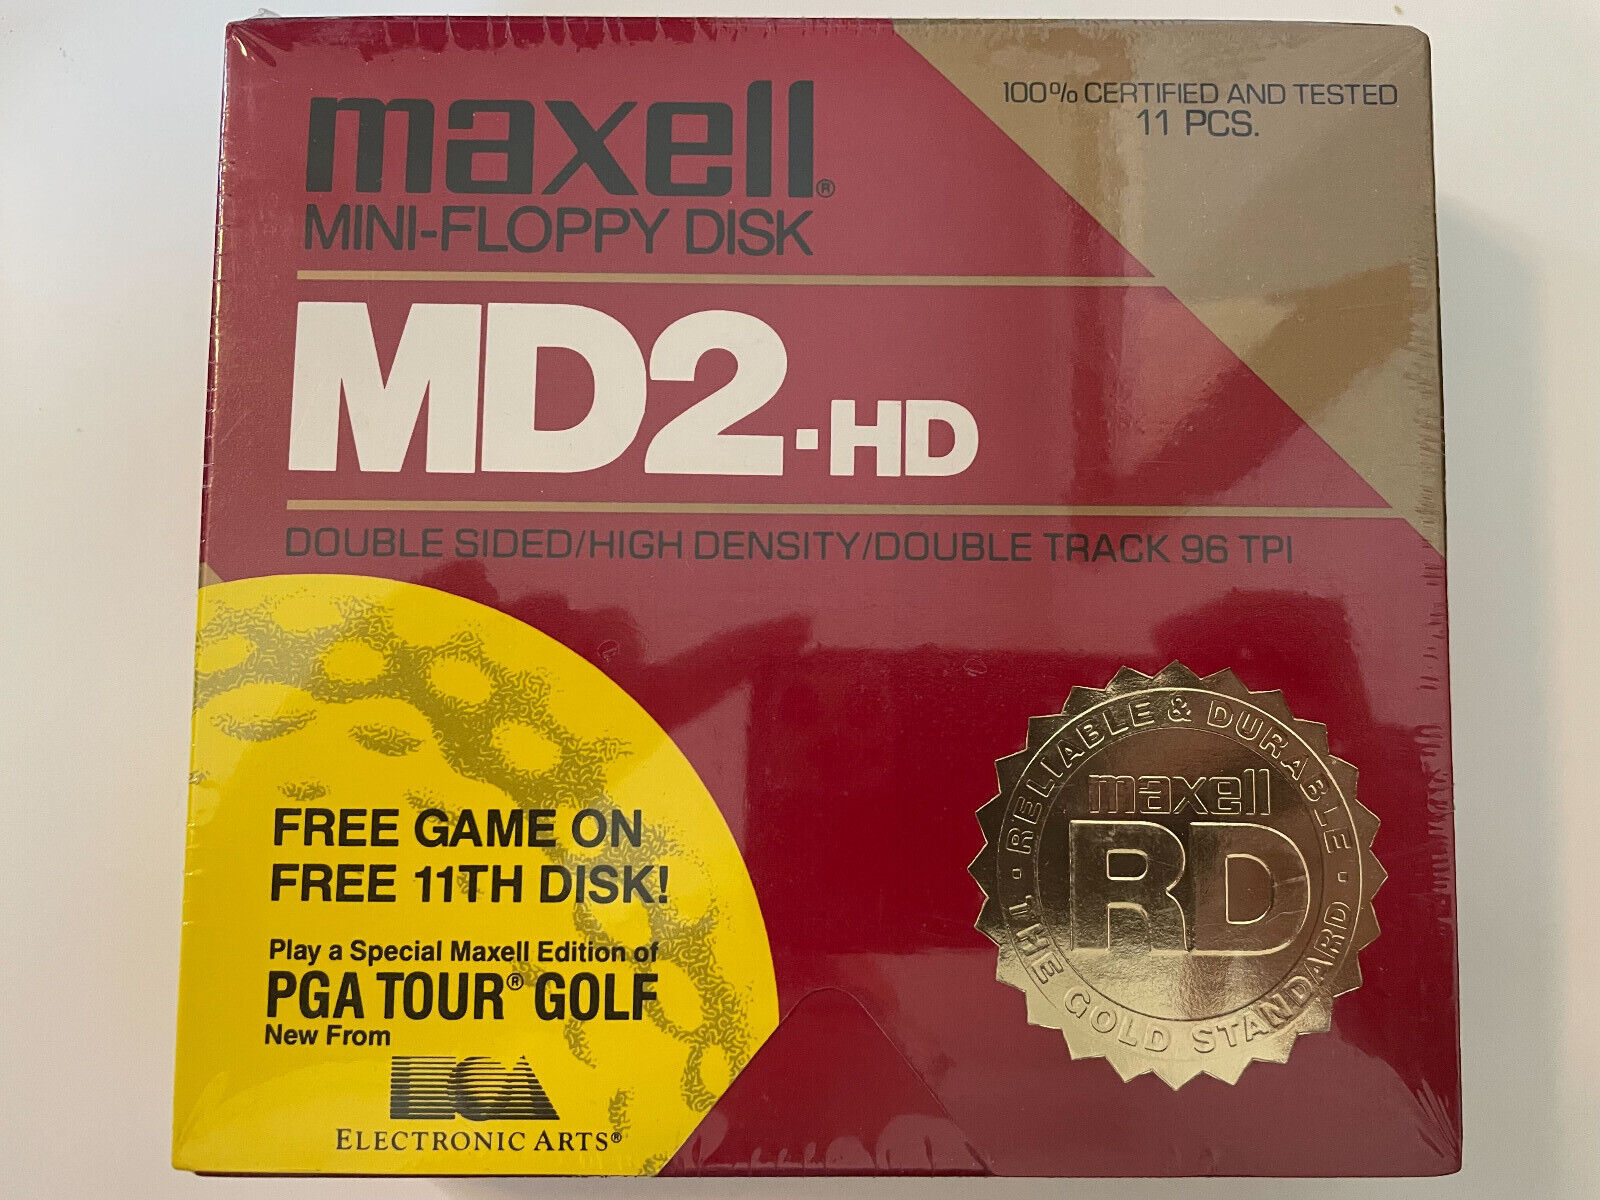 Maxell Mini-Floppy Disk MD2.HD Double Sided/High Density 96 TPI (11 Pcs)